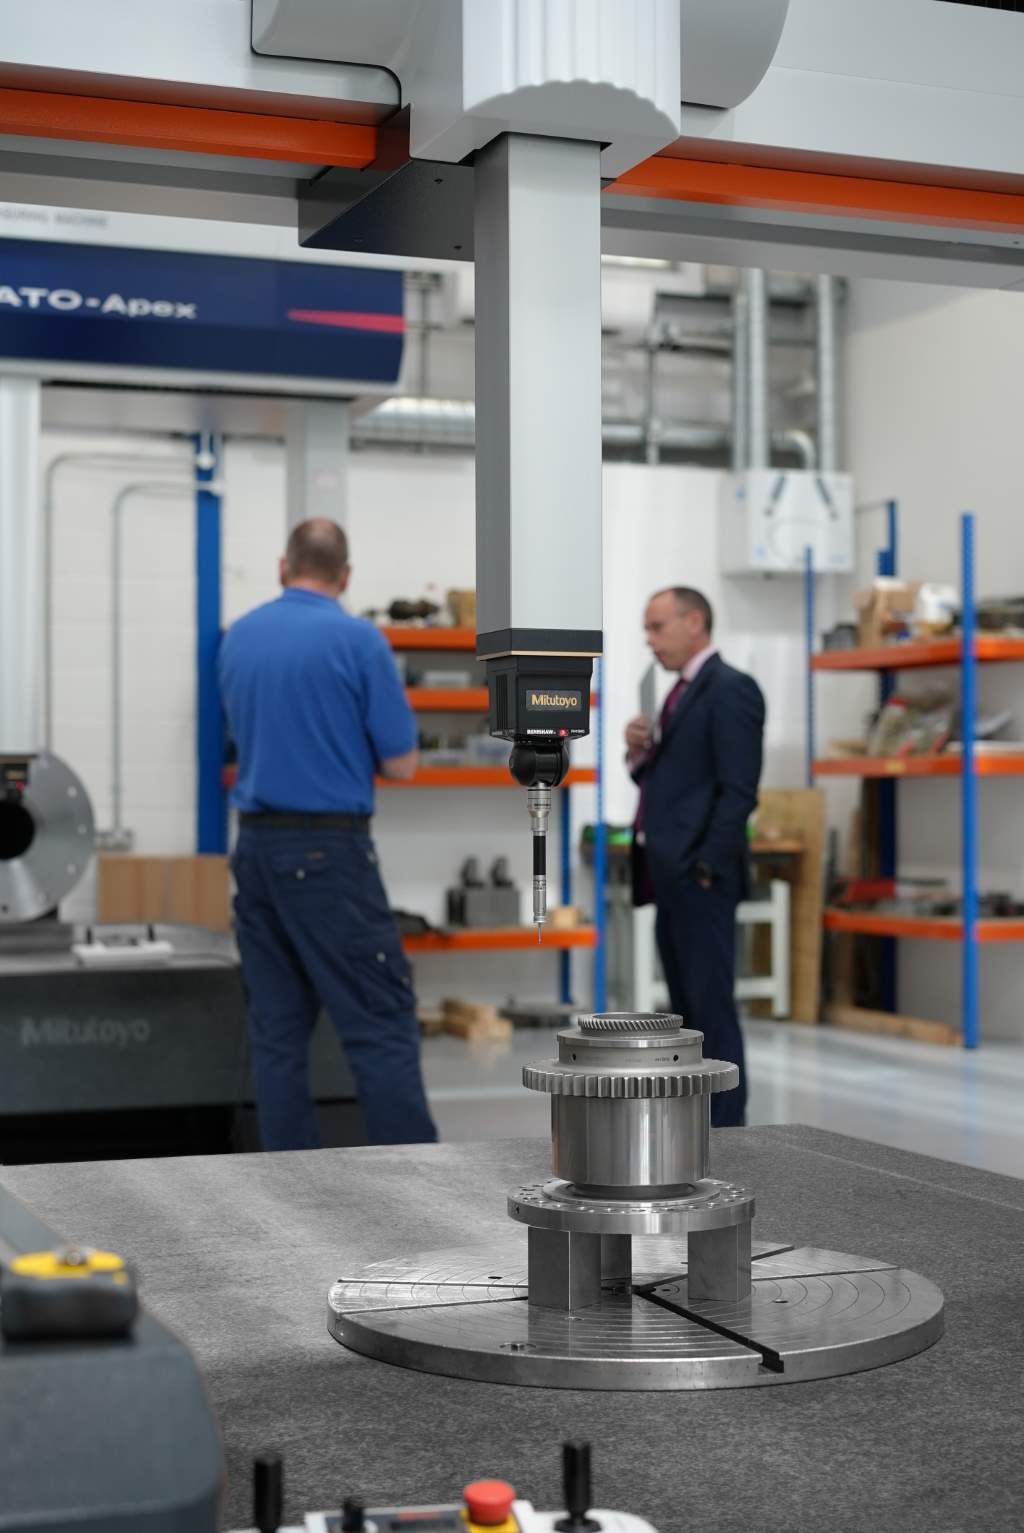 The Mitutoyo CMM range offers advanced capabilities to cover practically any measurement application in the small to mid-sized part range